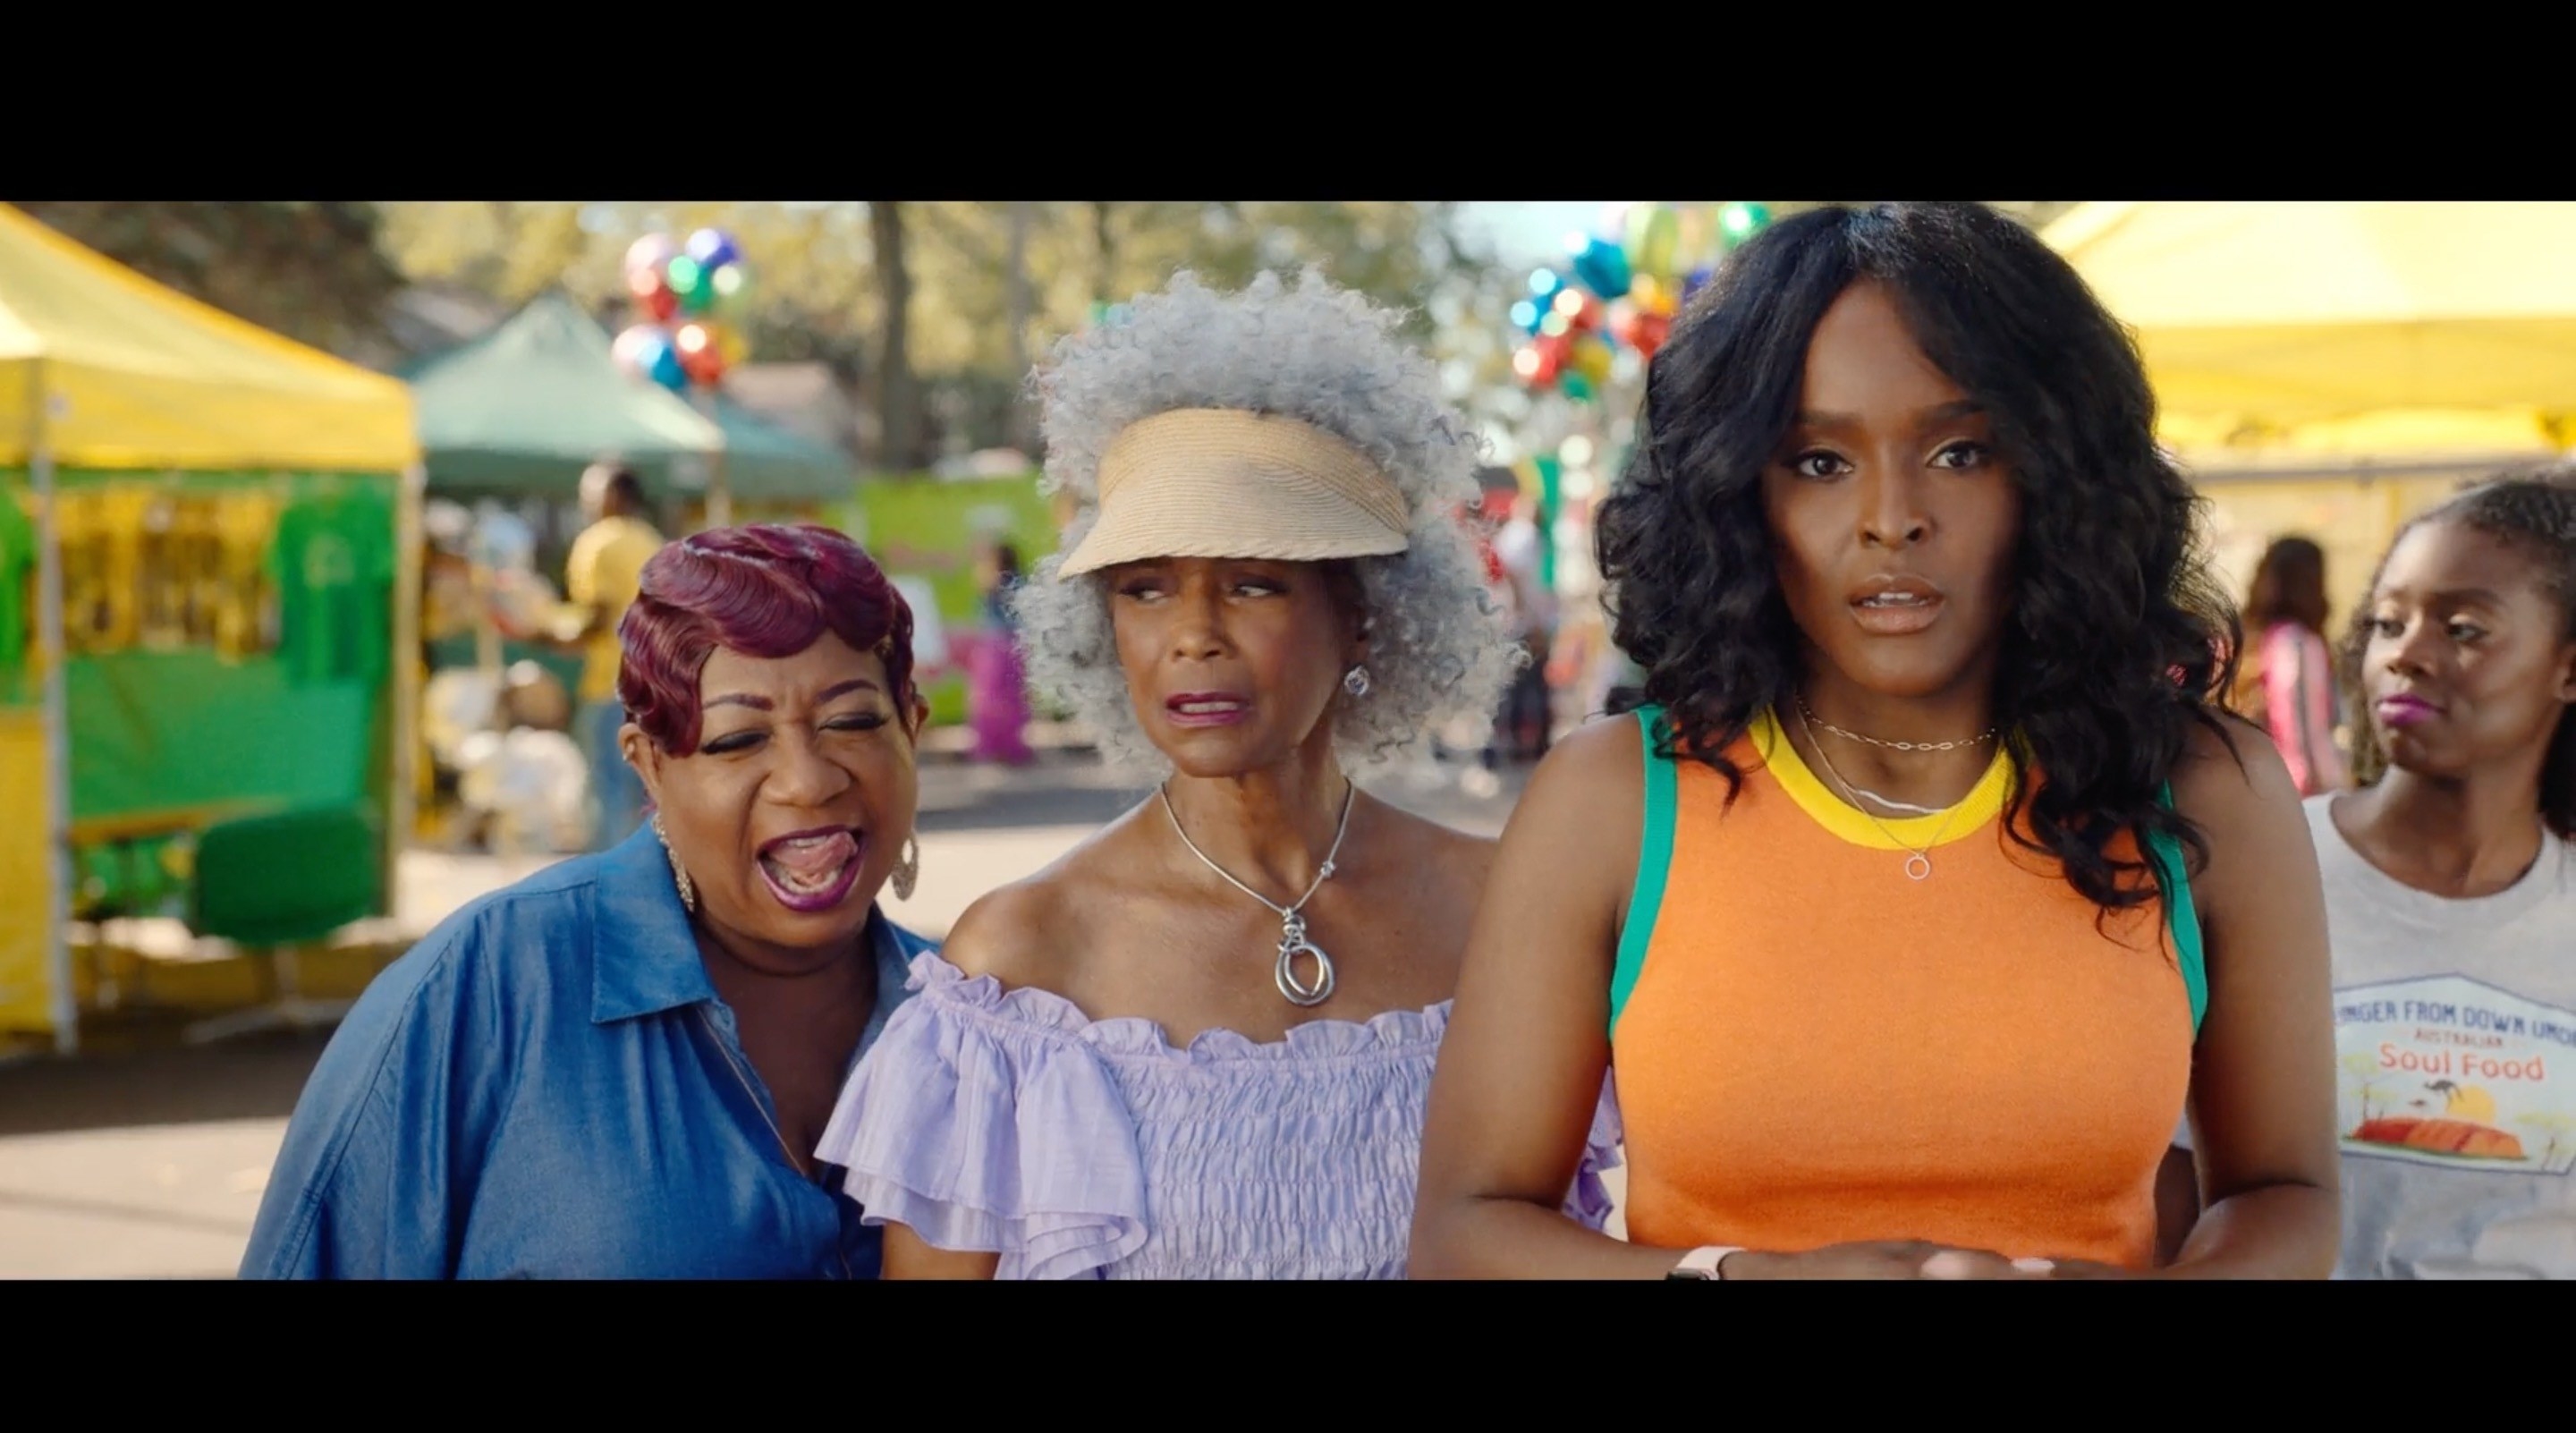 women at a block party stand together as one of them looks shocked